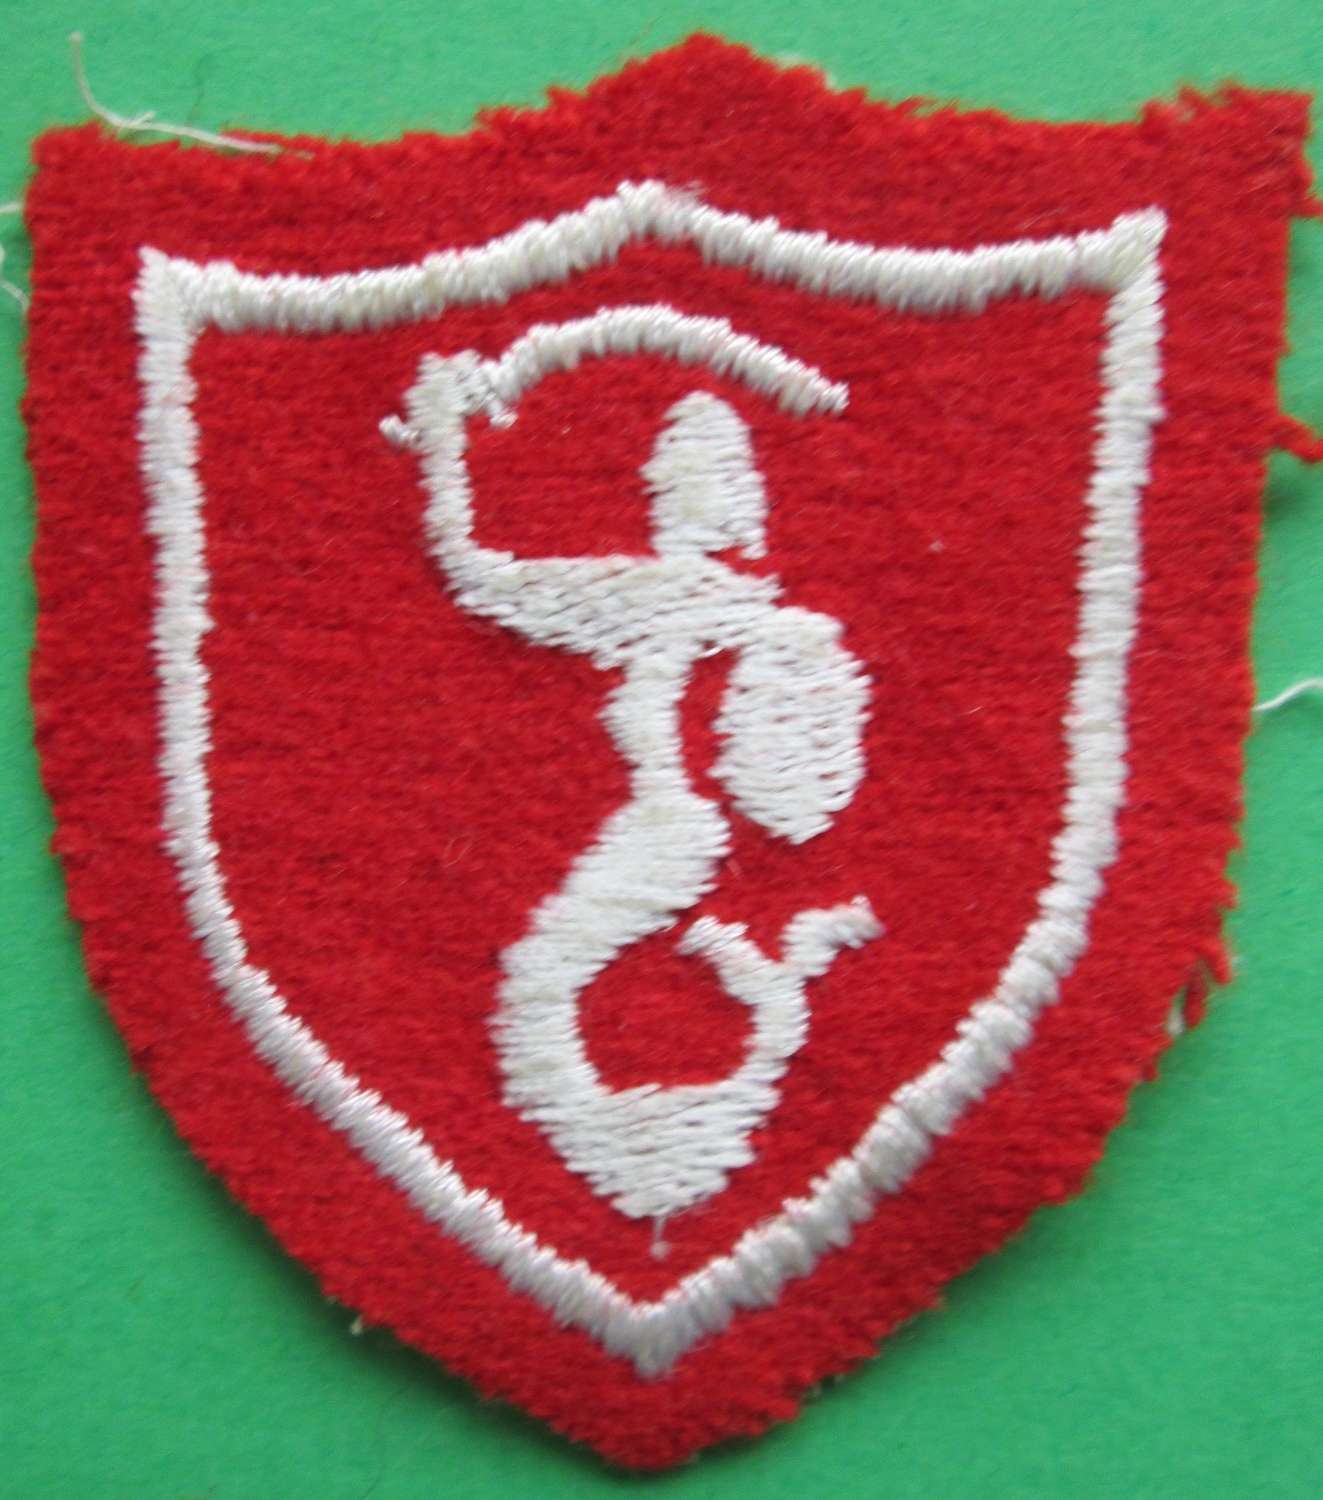 A 14TH POLISH CORPS FORMATION SIGN